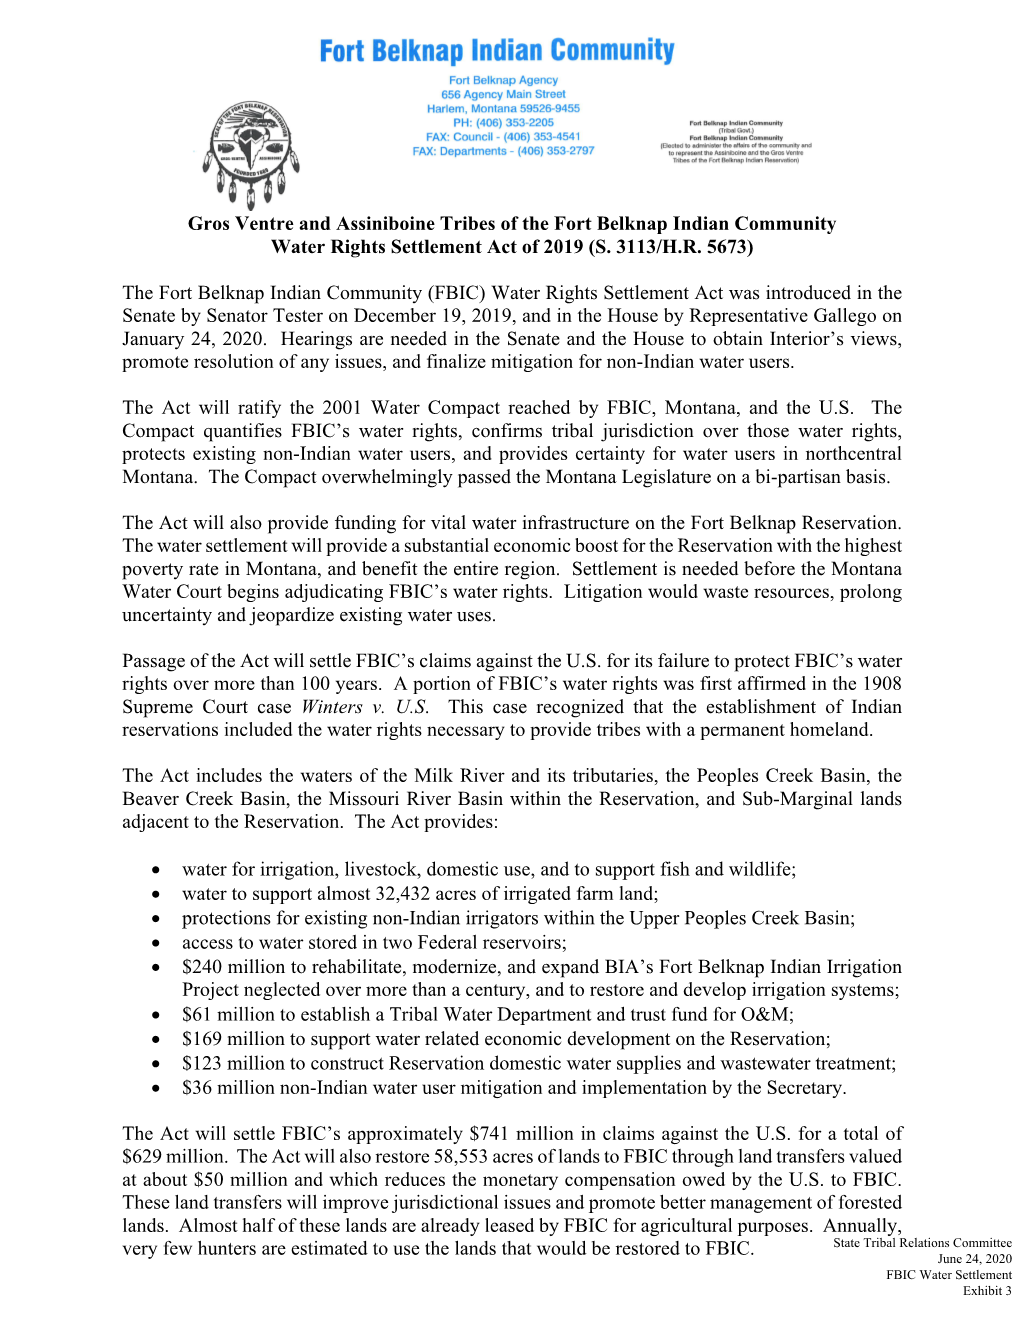 Gros Ventre and Assiniboine Tribes of the Fort Belknap Indian Community Water Rights Settlement Act of 2019 (S. 3113/H.R. 5673)